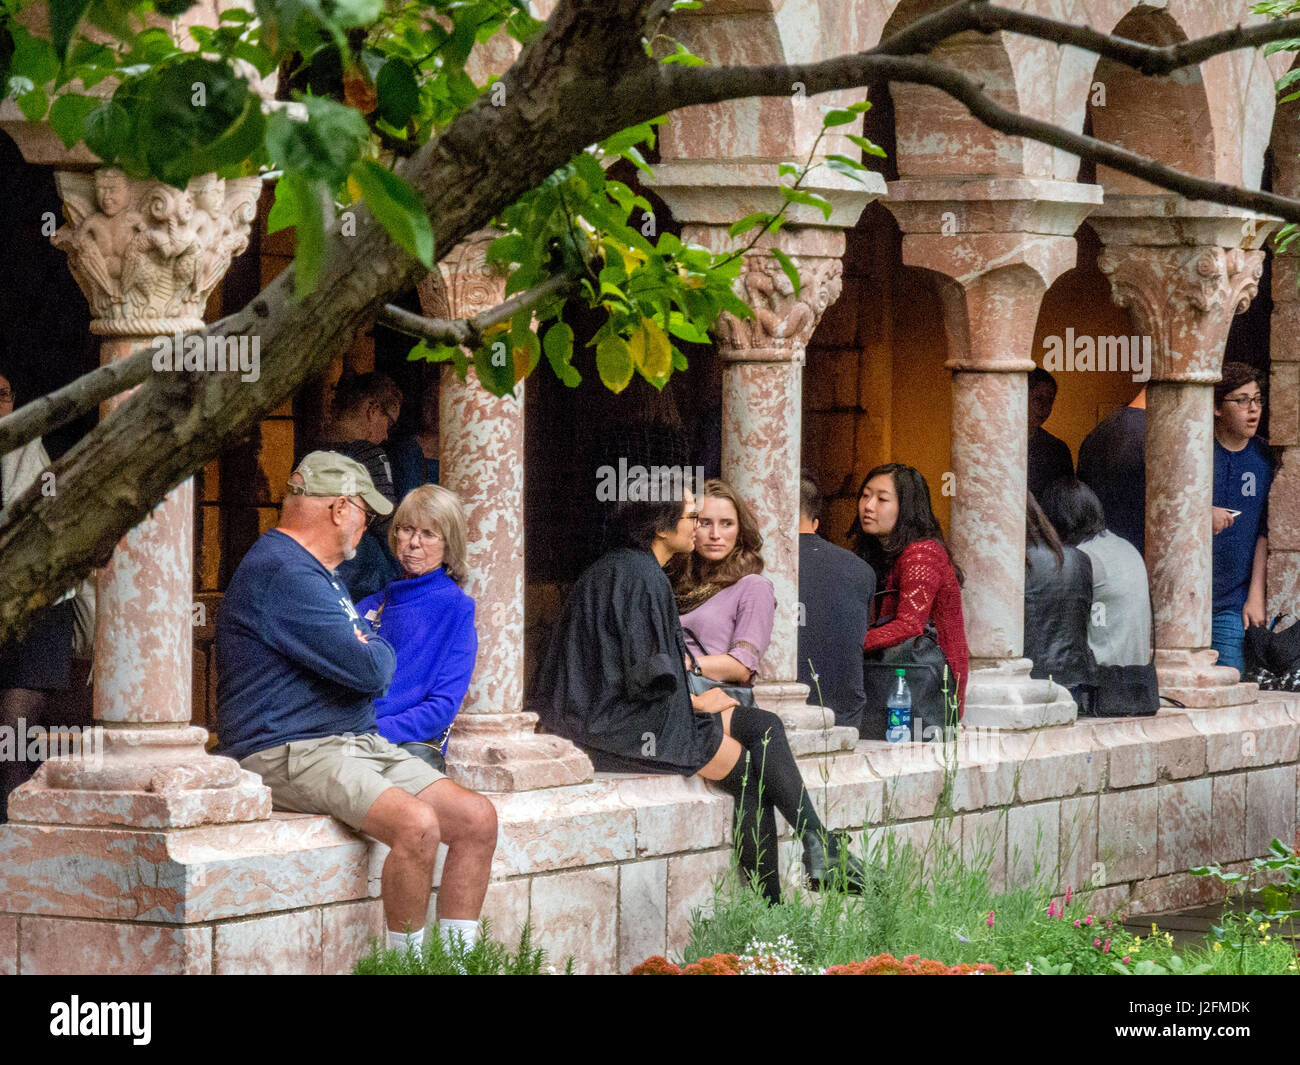 Perched on a wall with columns, multiracial visitors of different ages enjoy the Cuxa Cloister garden at The Cloisters Museum, a restored medieval monastery in Ft. Tryon Park, New York City. Stock Photo